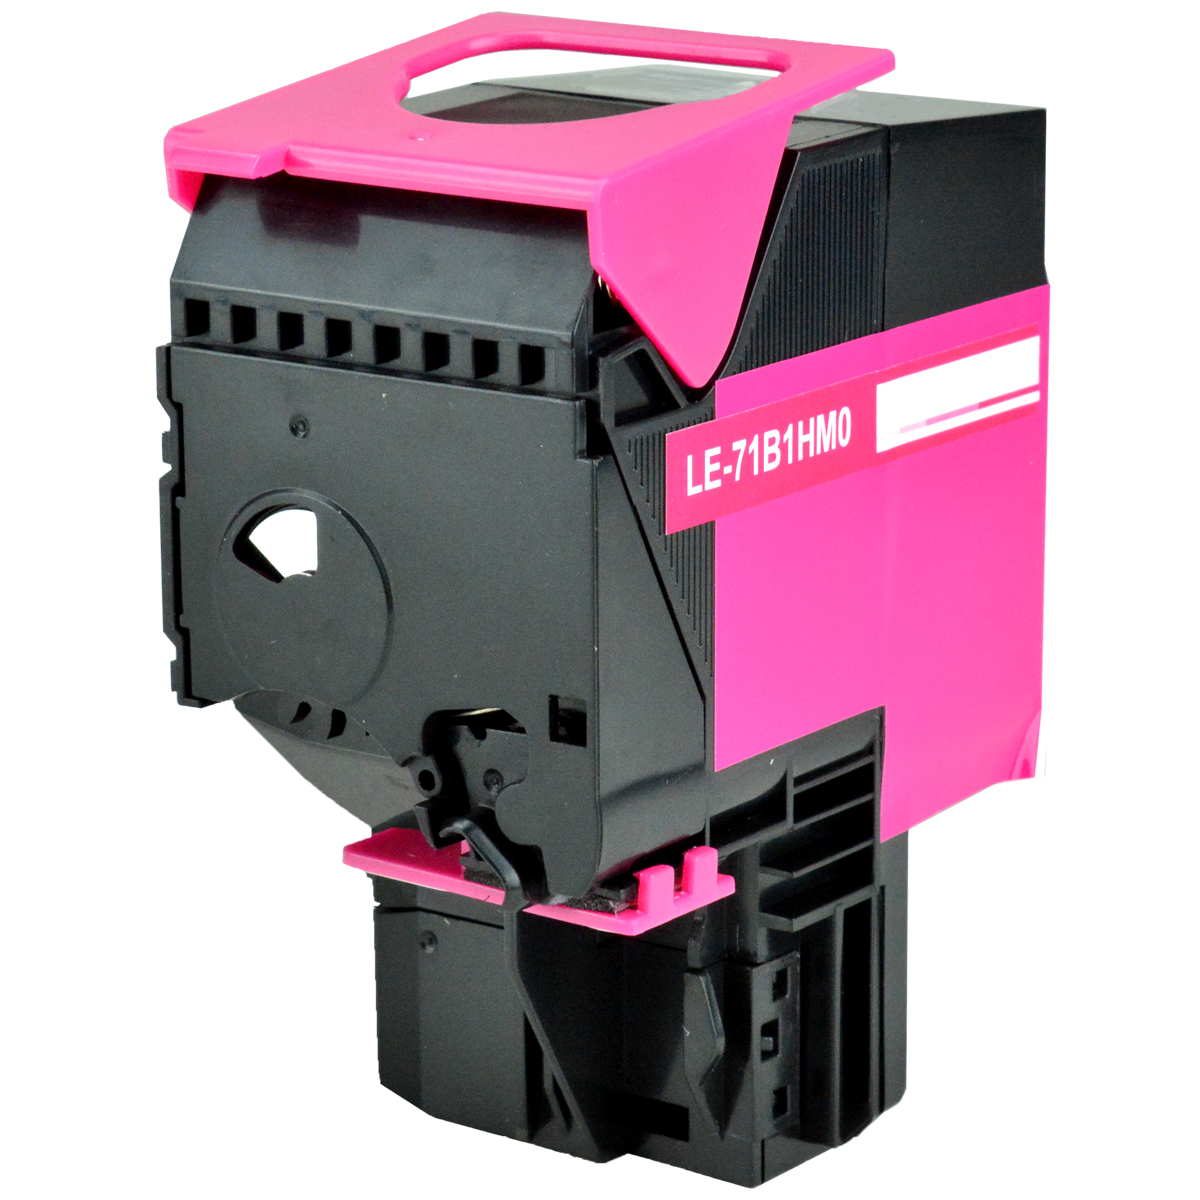 Compatible for Lexmark 71B1HM0 (71B0H30) Toner Cartridge, Magenta, 3.5K High Yield Products - image 1 of 1